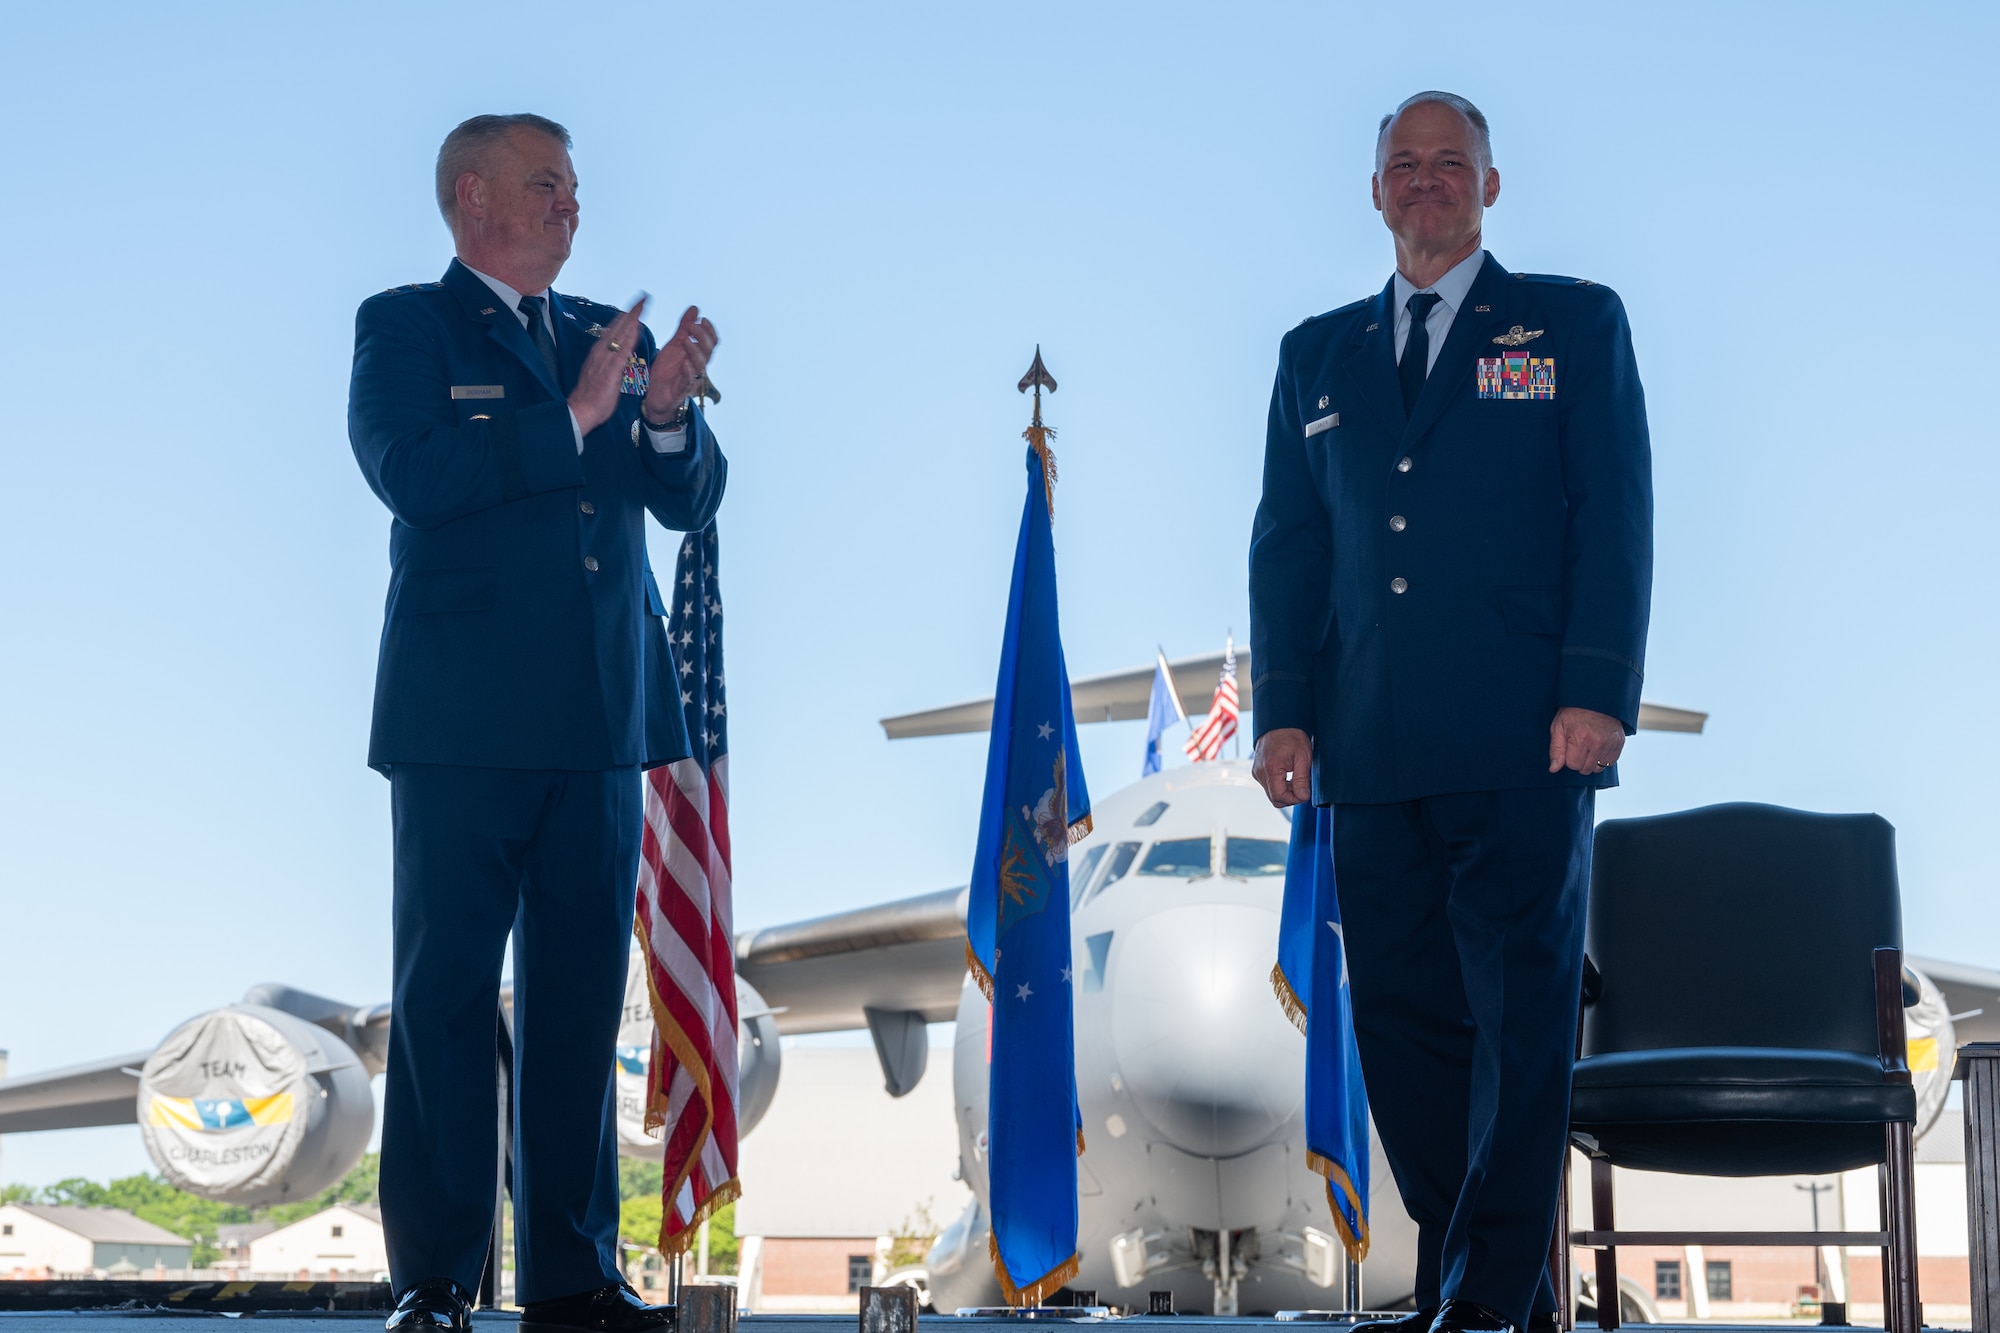 Col. Stephen Lanier (right) assumed command of the Air Force Reserve's 315th Airlift Wing during a ceremony at Joint Base Charleston, South Carolina, April 14, 2024. Maj. Gen. D. Scott Durham, Fourth Air Force commander, officiated the ceremony to welcome the new commander. (U.S. Air Force photo by Tech. Sgt. Della Creech)